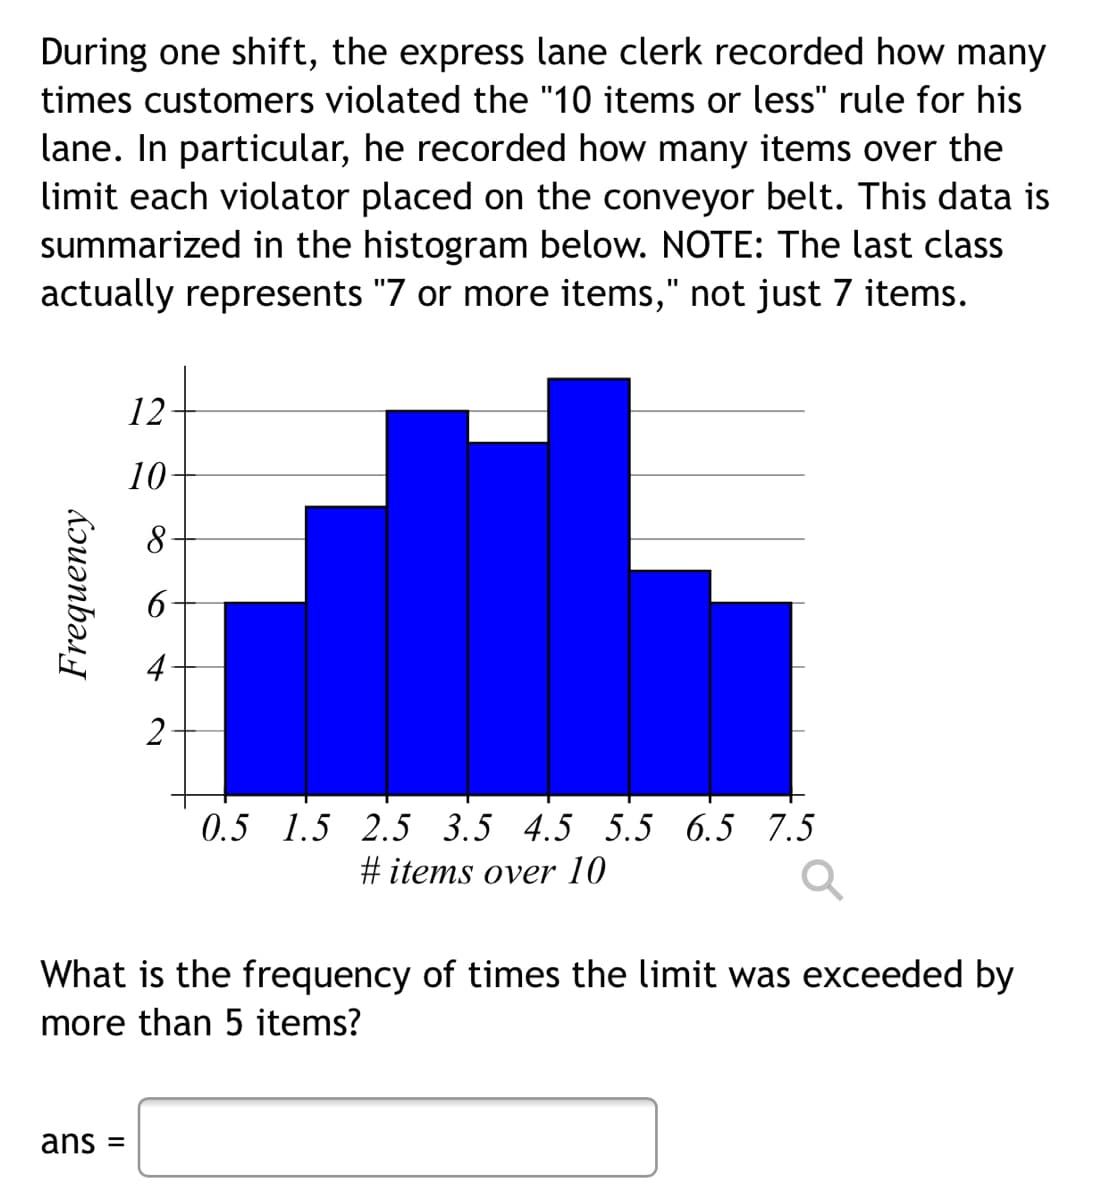 During one shift, the express lane clerk recorded how many
times customers violated the "10 items or less" rule for his
lane. In particular, he recorded how many items over the
limit each violator placed on the conveyor belt. This data is
summarized in the histogram below. NOTE: The last class
actually represents "7 or more items," not just 7 items.
12
10
2
0.5 1.5 2.5 3.5 4.5 5.5 6.5 7.5
#items over 10
What is the frequency of times the limit was exceeded by
more than 5 items?
ans =
Frequency
8
4